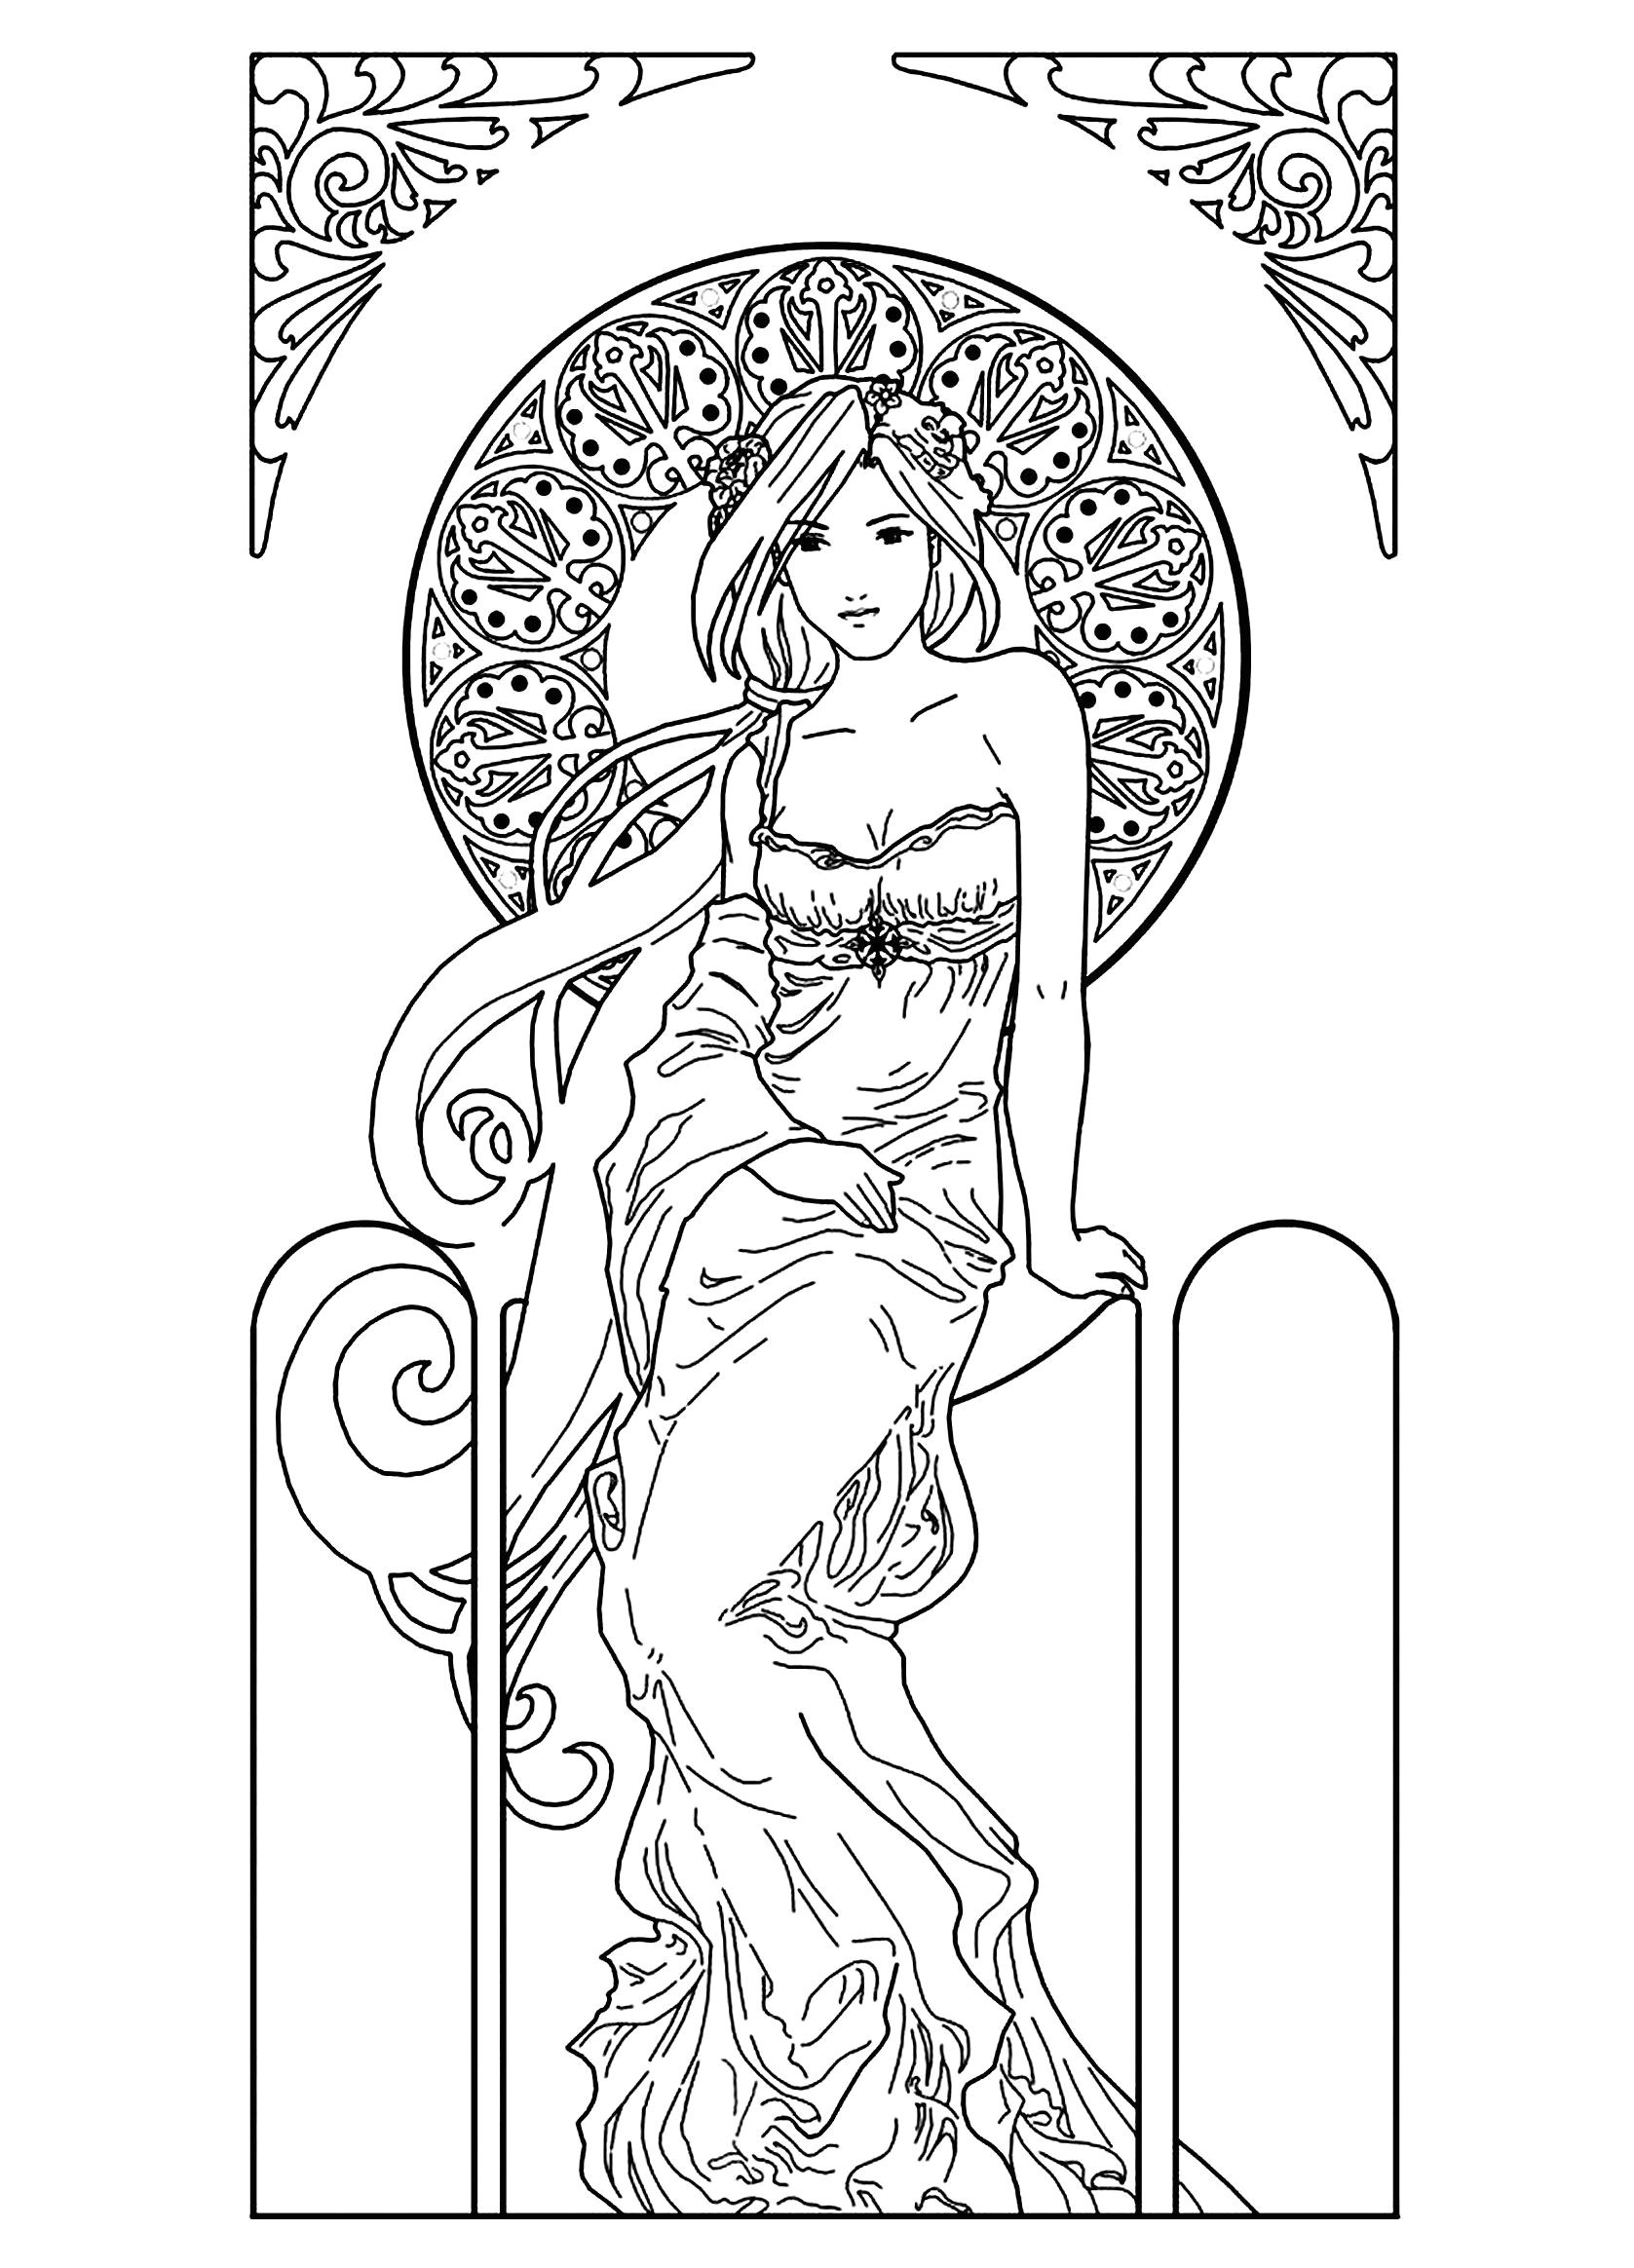 Drawing of a woman Art nouveau style